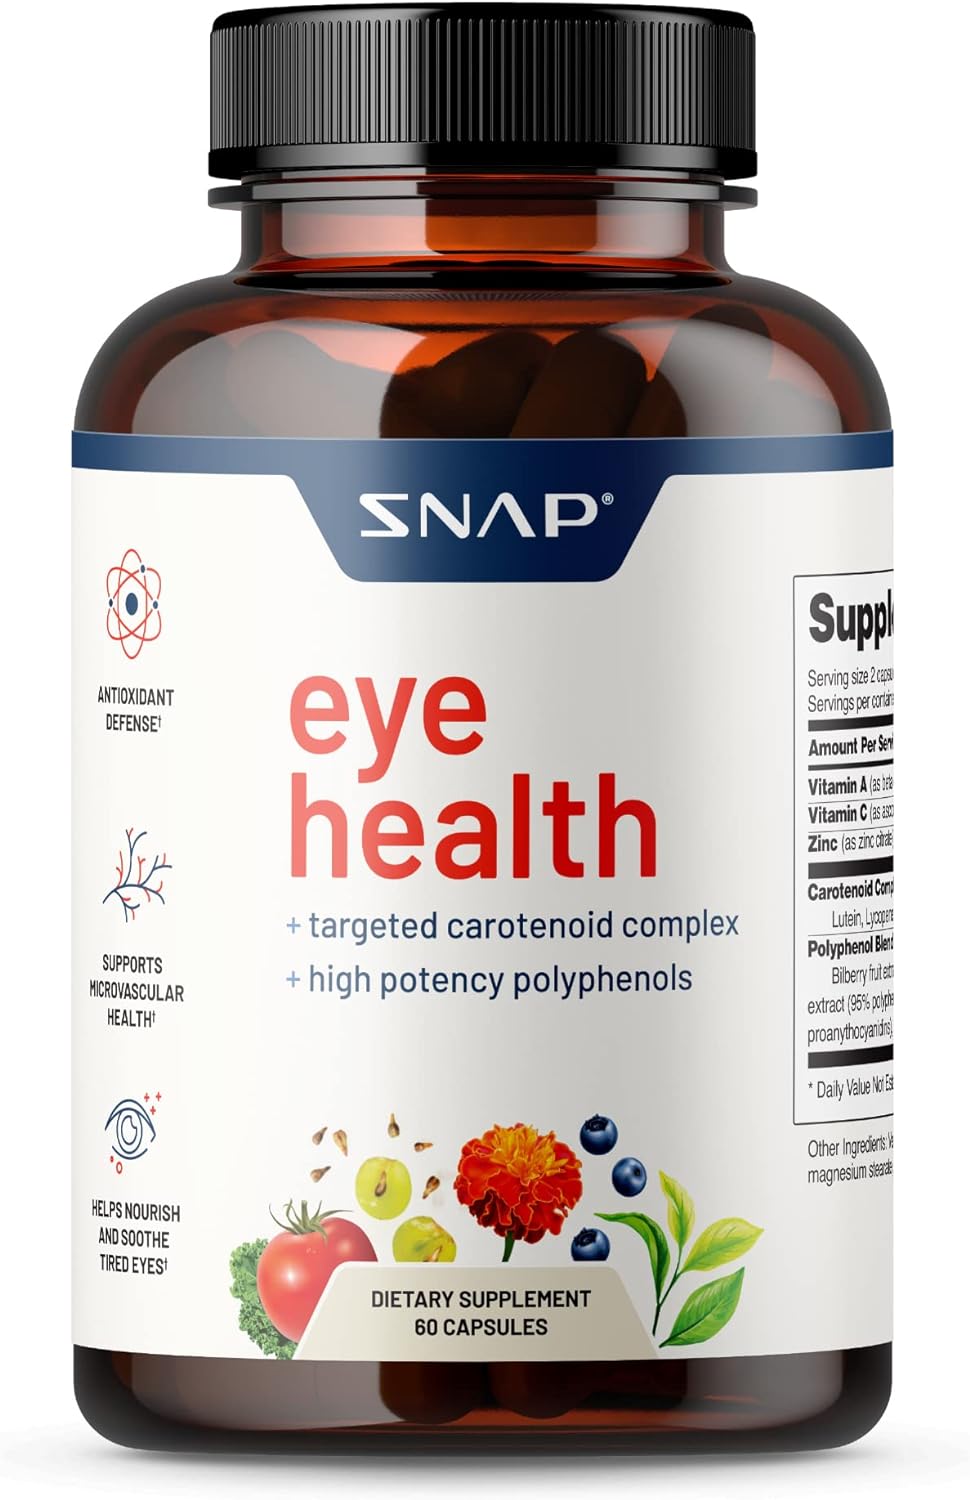 Snap Eye Health Supplements for Adults, Lutein and Zeaxanthin Supplements, Bilberry Extract, Lycopene Supplement, Support Eye Health, Natural Carotenoid Complex, Eye Vitamins and Herbs, 60 Capsules